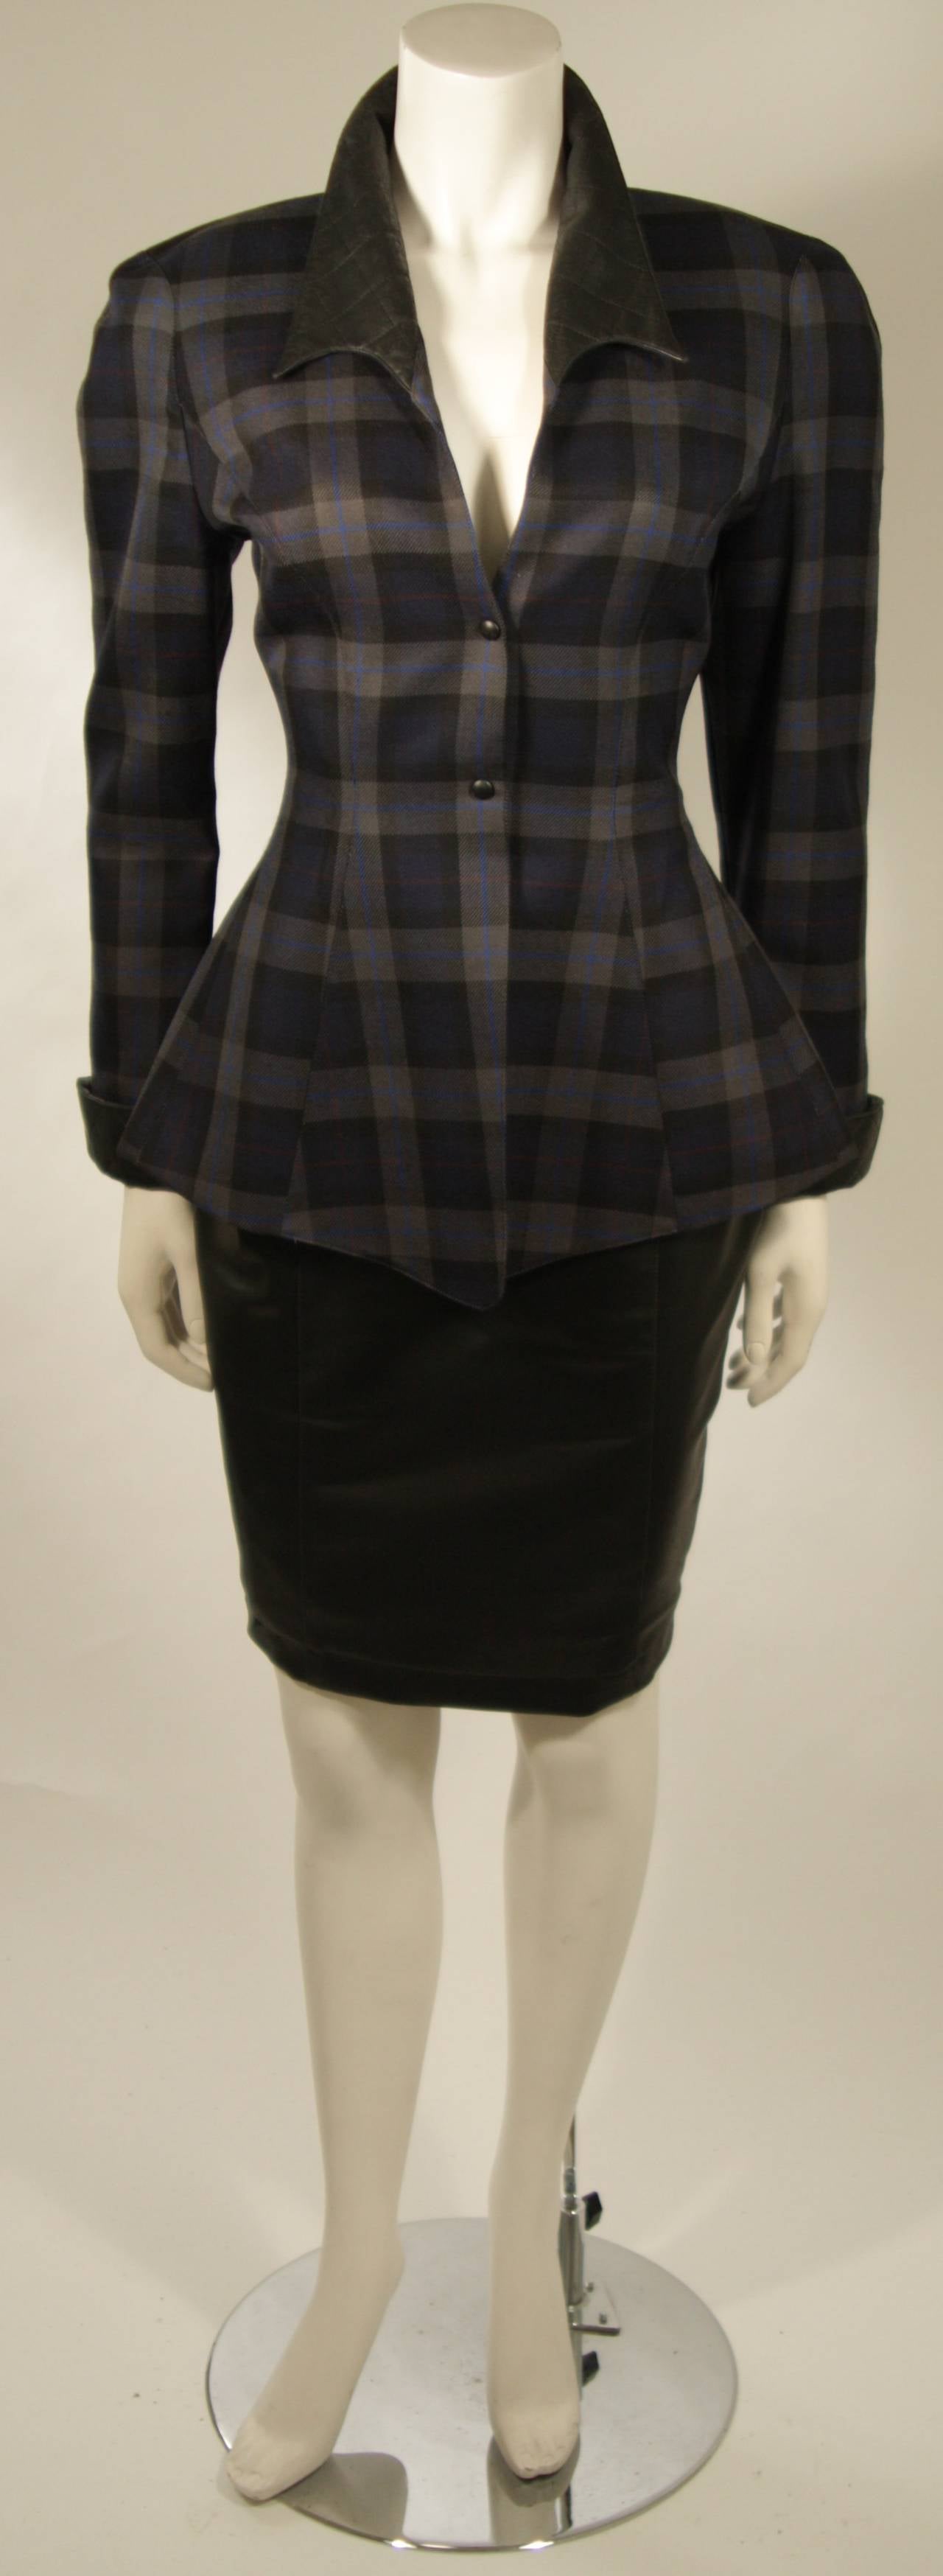 This Thierry Mugler two-piece skirt suit is composed of a blue and grey plaid with faux leather. The jacket is accented by a quilted faux leather at the collar and cuffs. The skirt is composed of a black faux leather and features a pencil silhouette